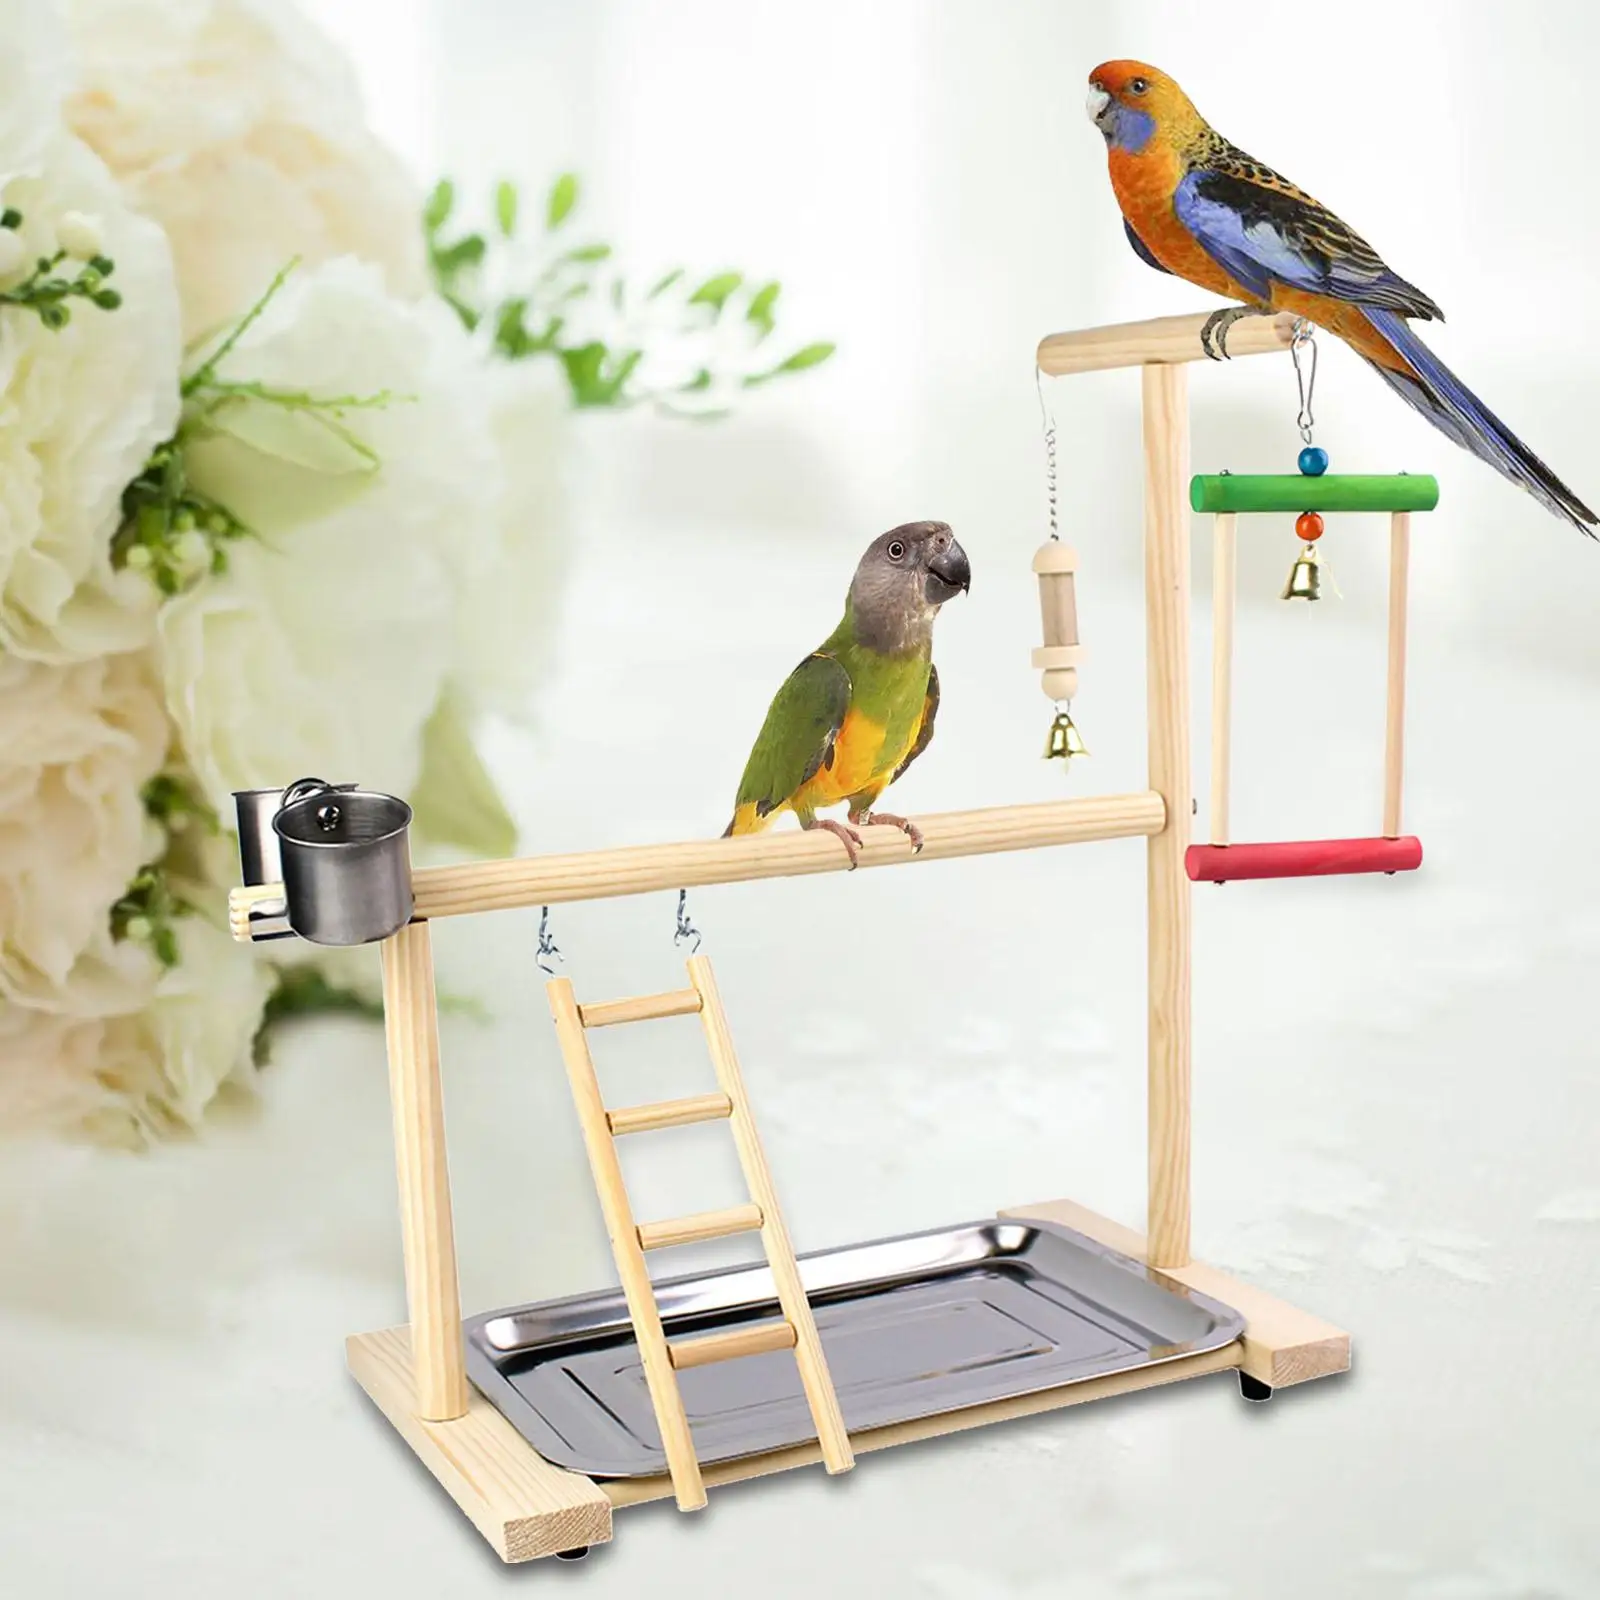 Toys Bird Perch Platform Bird Playground Gym Ladder with Feeder Cups Exercise Bird Gym Toys Wood Pet Parrot Playstand for Budgie